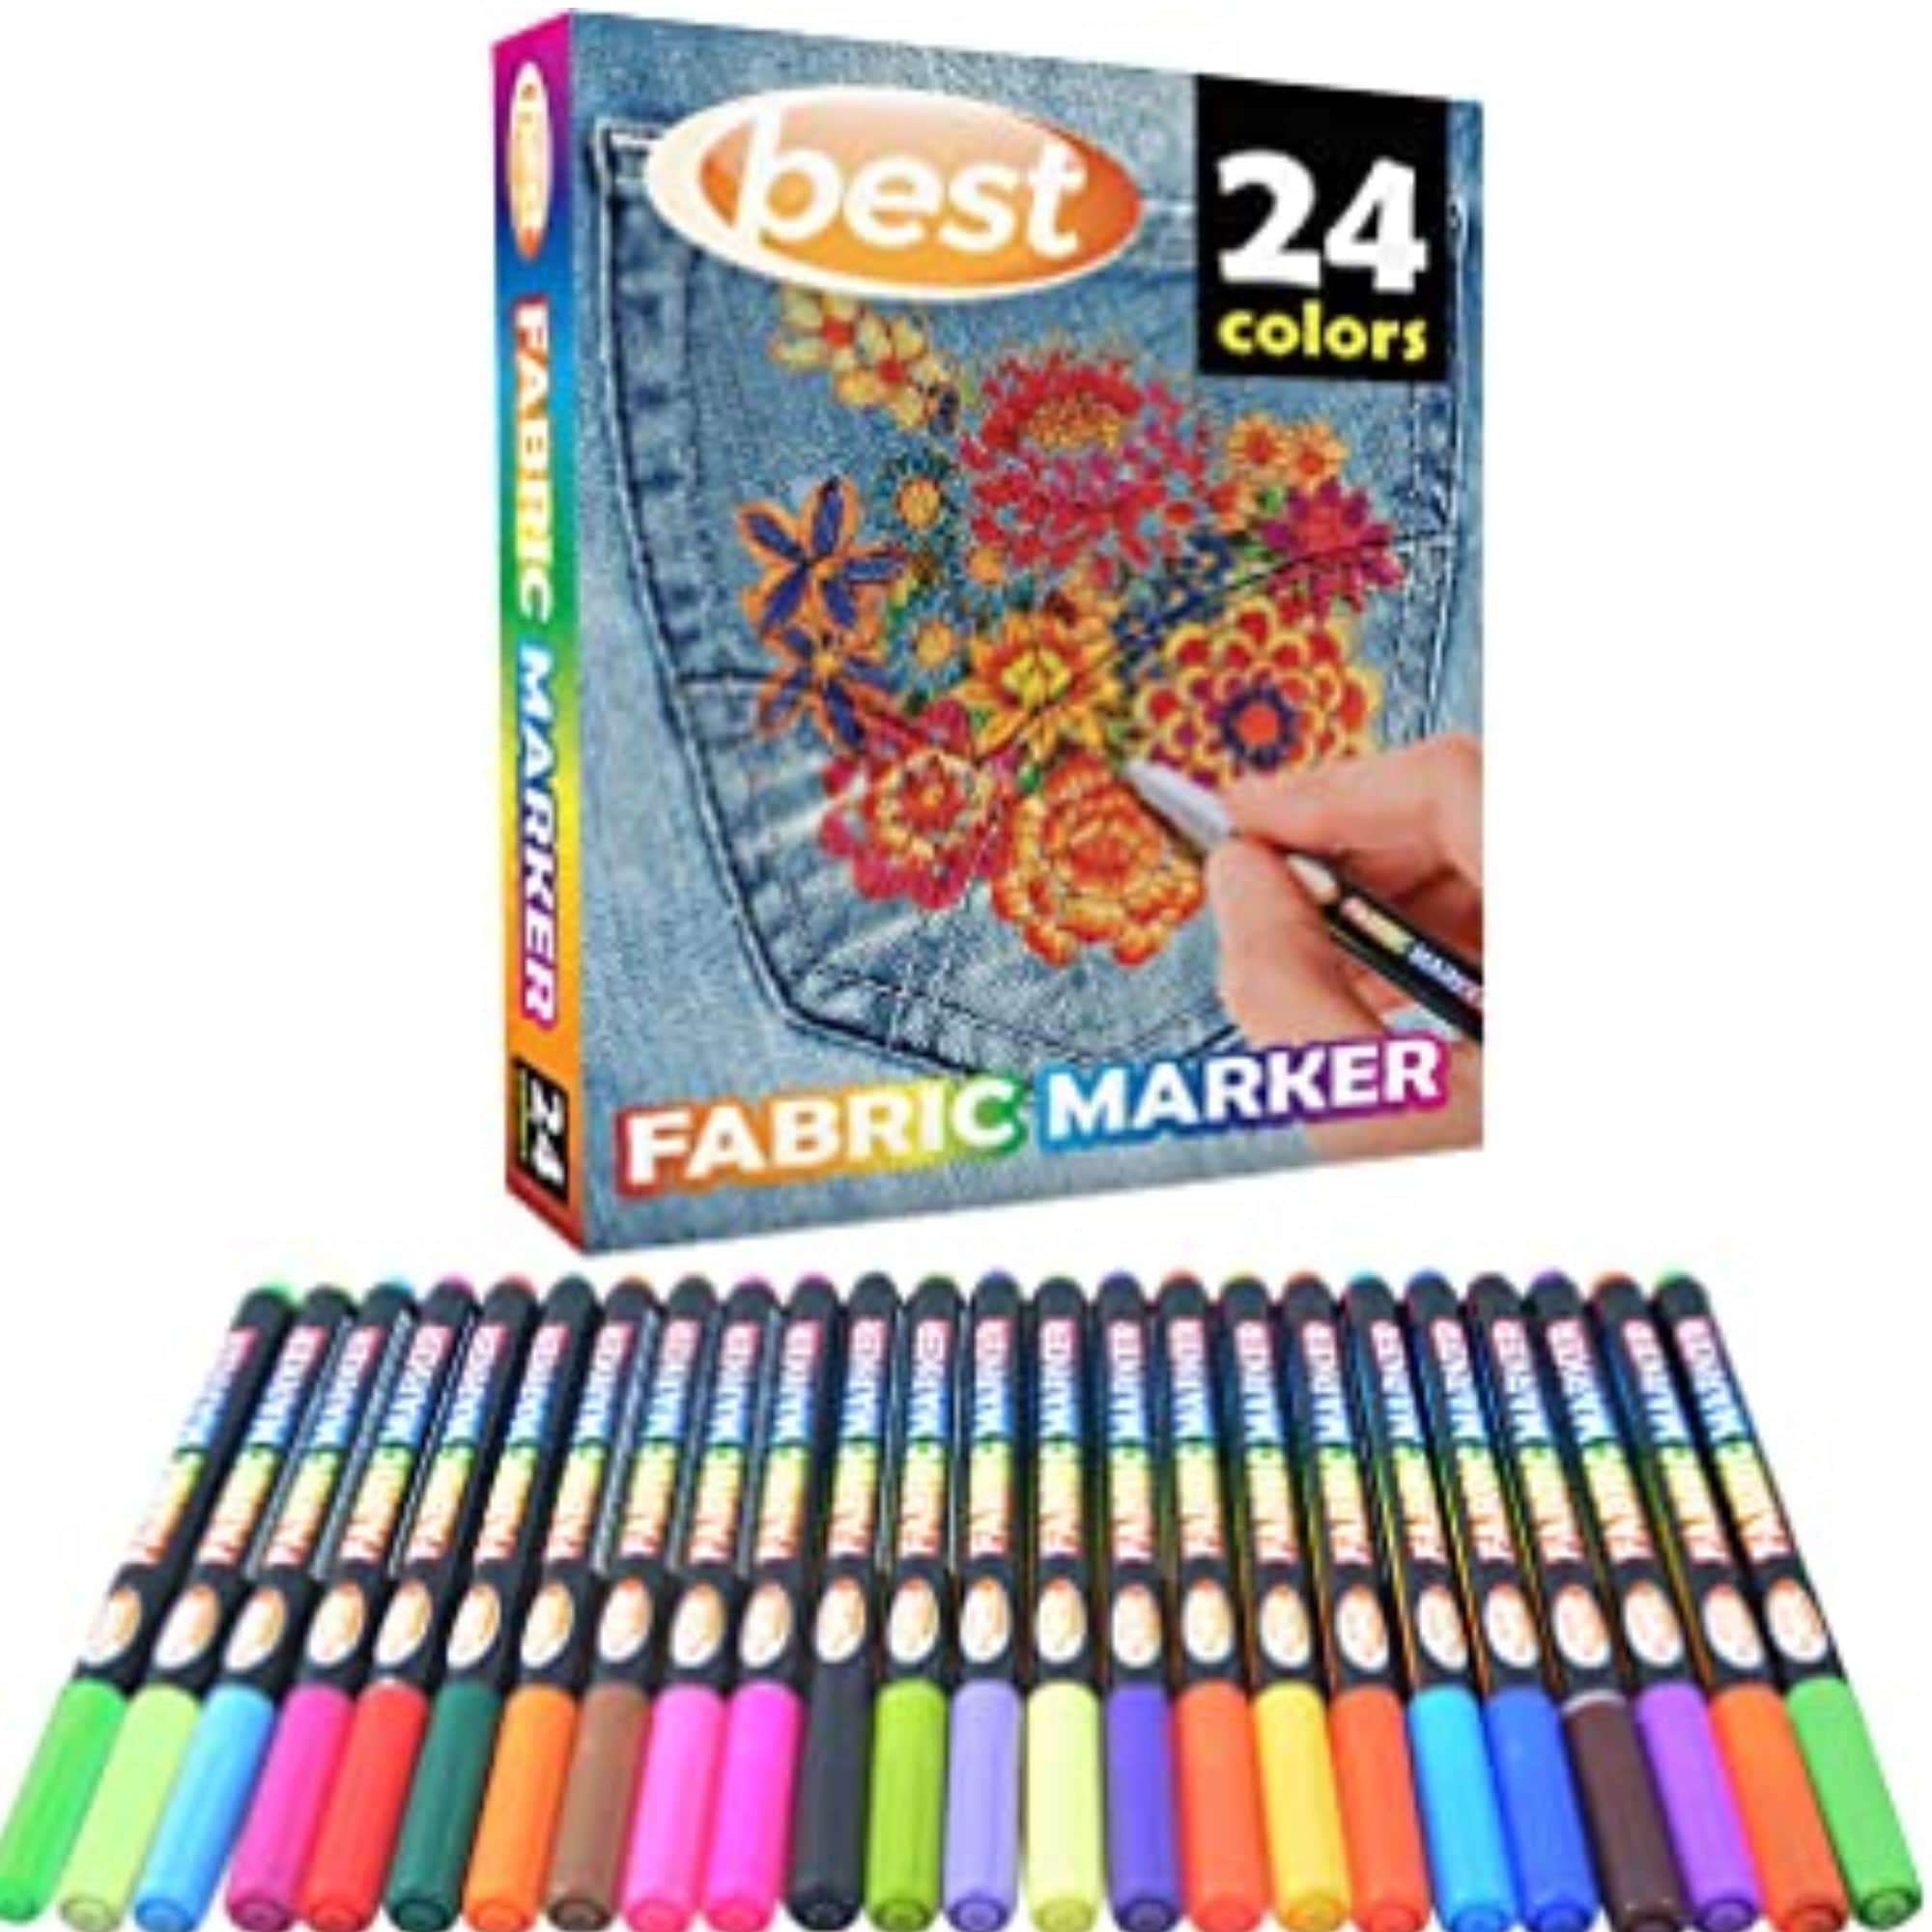 Studio 71 Bold Primary Color Alcohol Markers, Set of 6, With